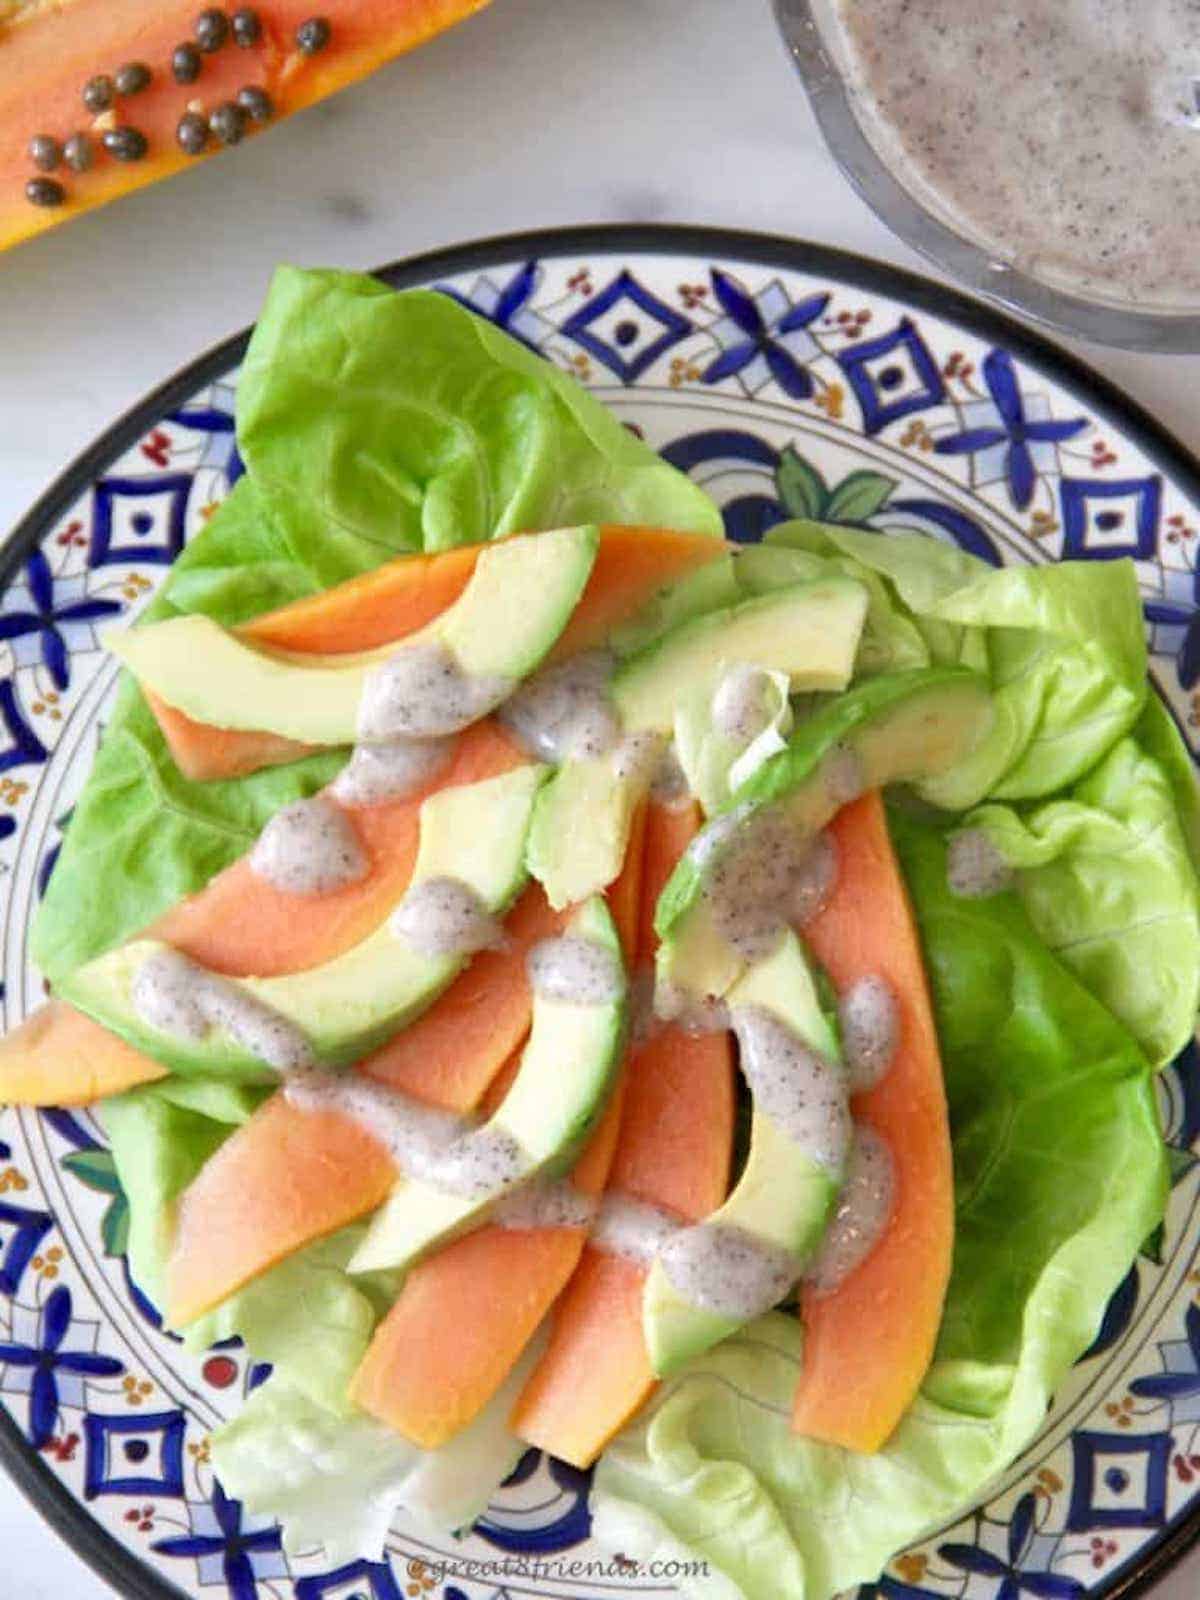 Papaya, Avocado and lettuce salad on a colorful blue plate with a papaya and seeds next to the plate and a bowl of dressing next to the plate.